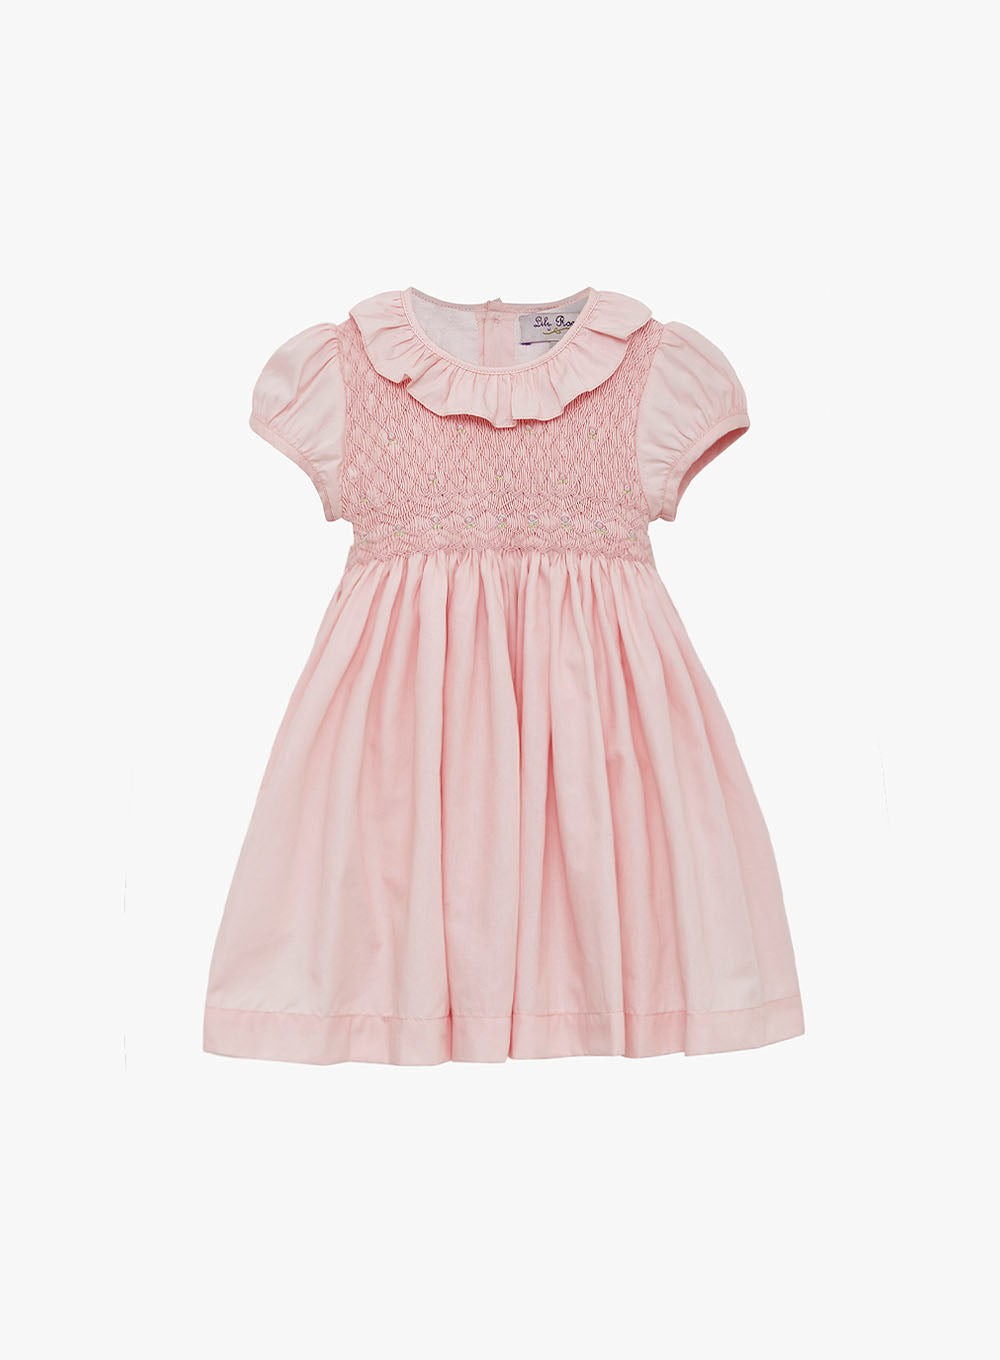 Toddler Easter Dresses – tagged 2-3-4-5-6-6x – Carriage Boutique